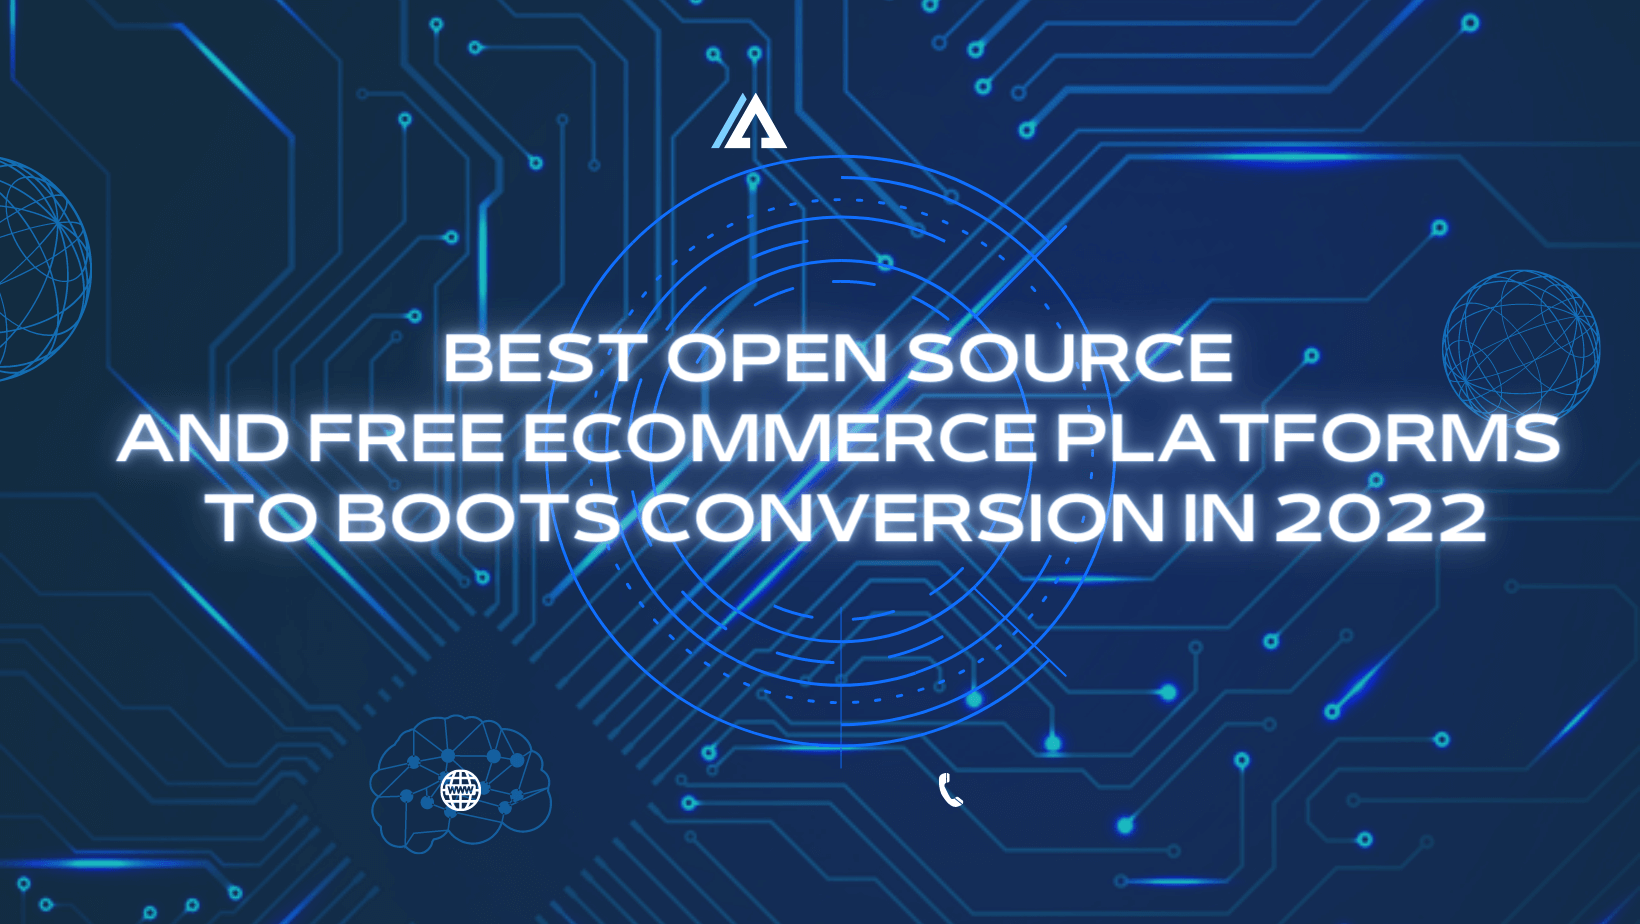 Best Open Source and Free Ecommerce Platforms to boots conversion in 2022